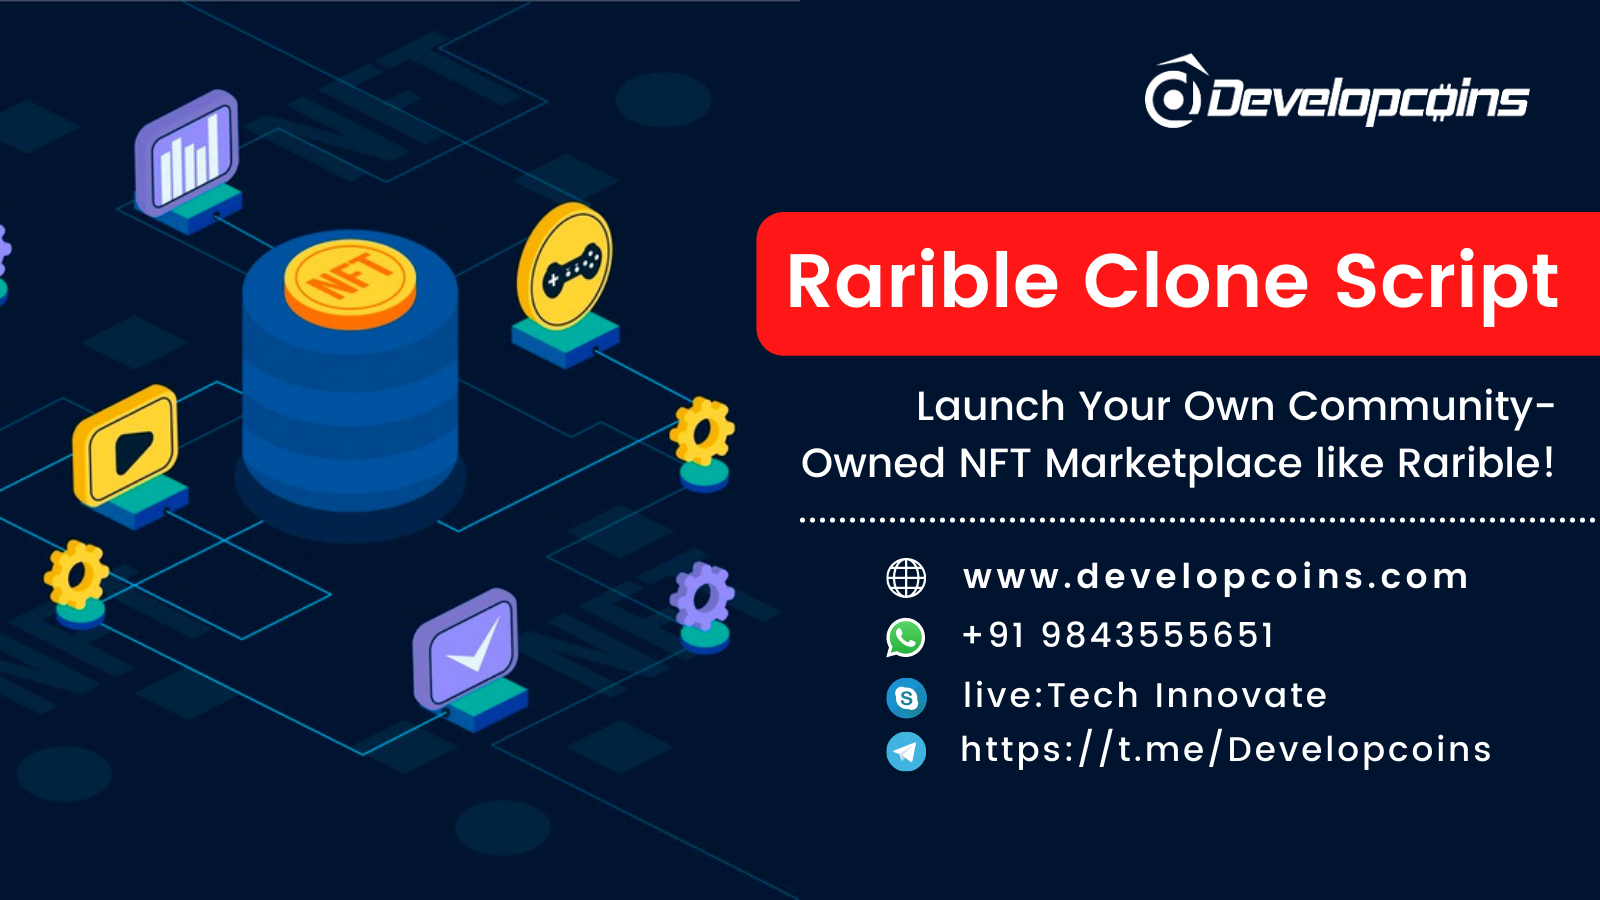 Rarible Clone Script - To Launch Your Own Community-Owned NFT Marketplace like Rarible